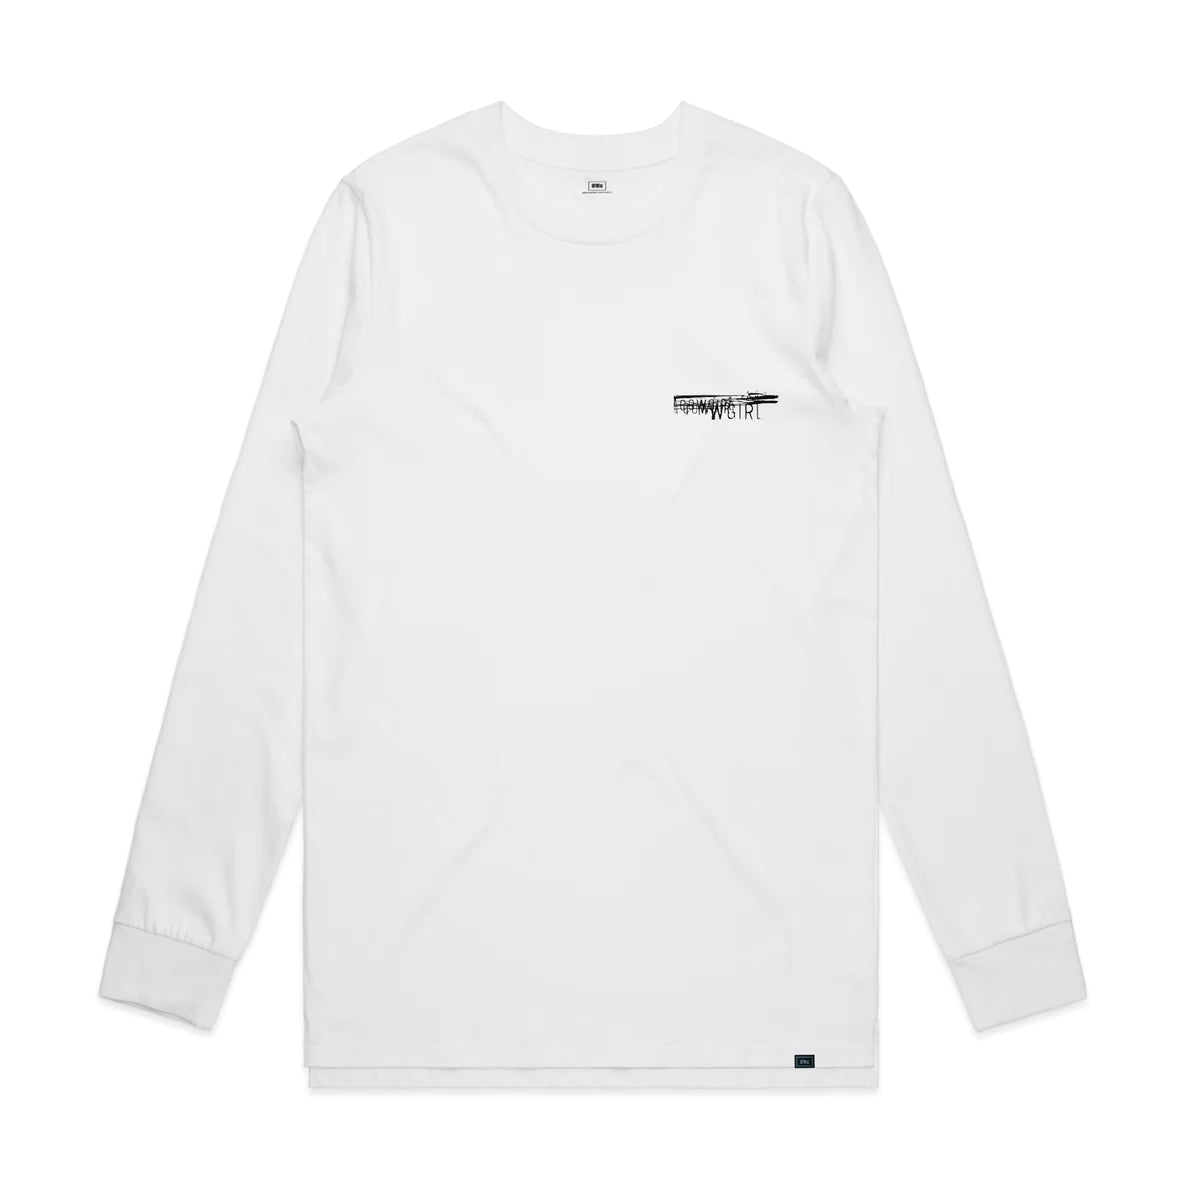 Underworld - *Cowgirl Limited Drop* Cowgirl Long Sleeve White Tee